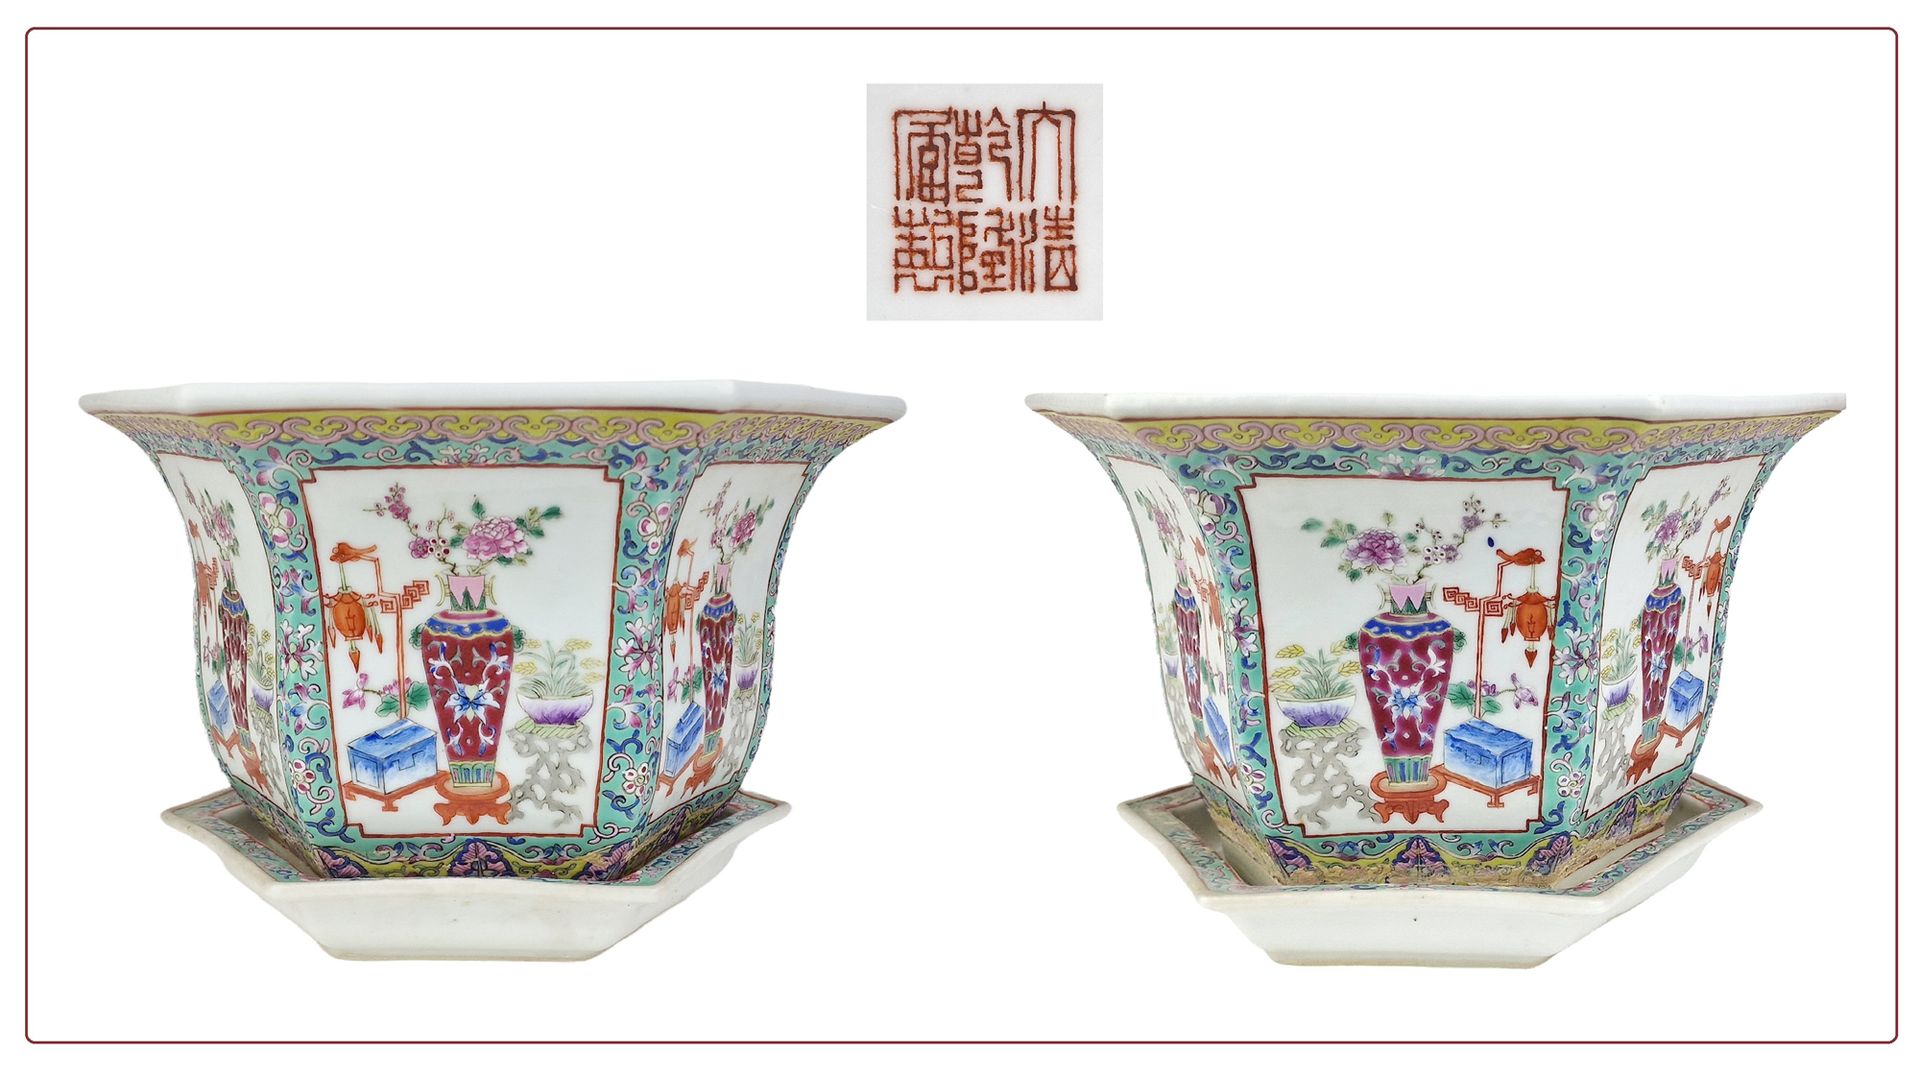 CHINE, DYNASTIE QING CHINA, QING DYNASTY

Pair of planters and their bowl

-----&hellip;